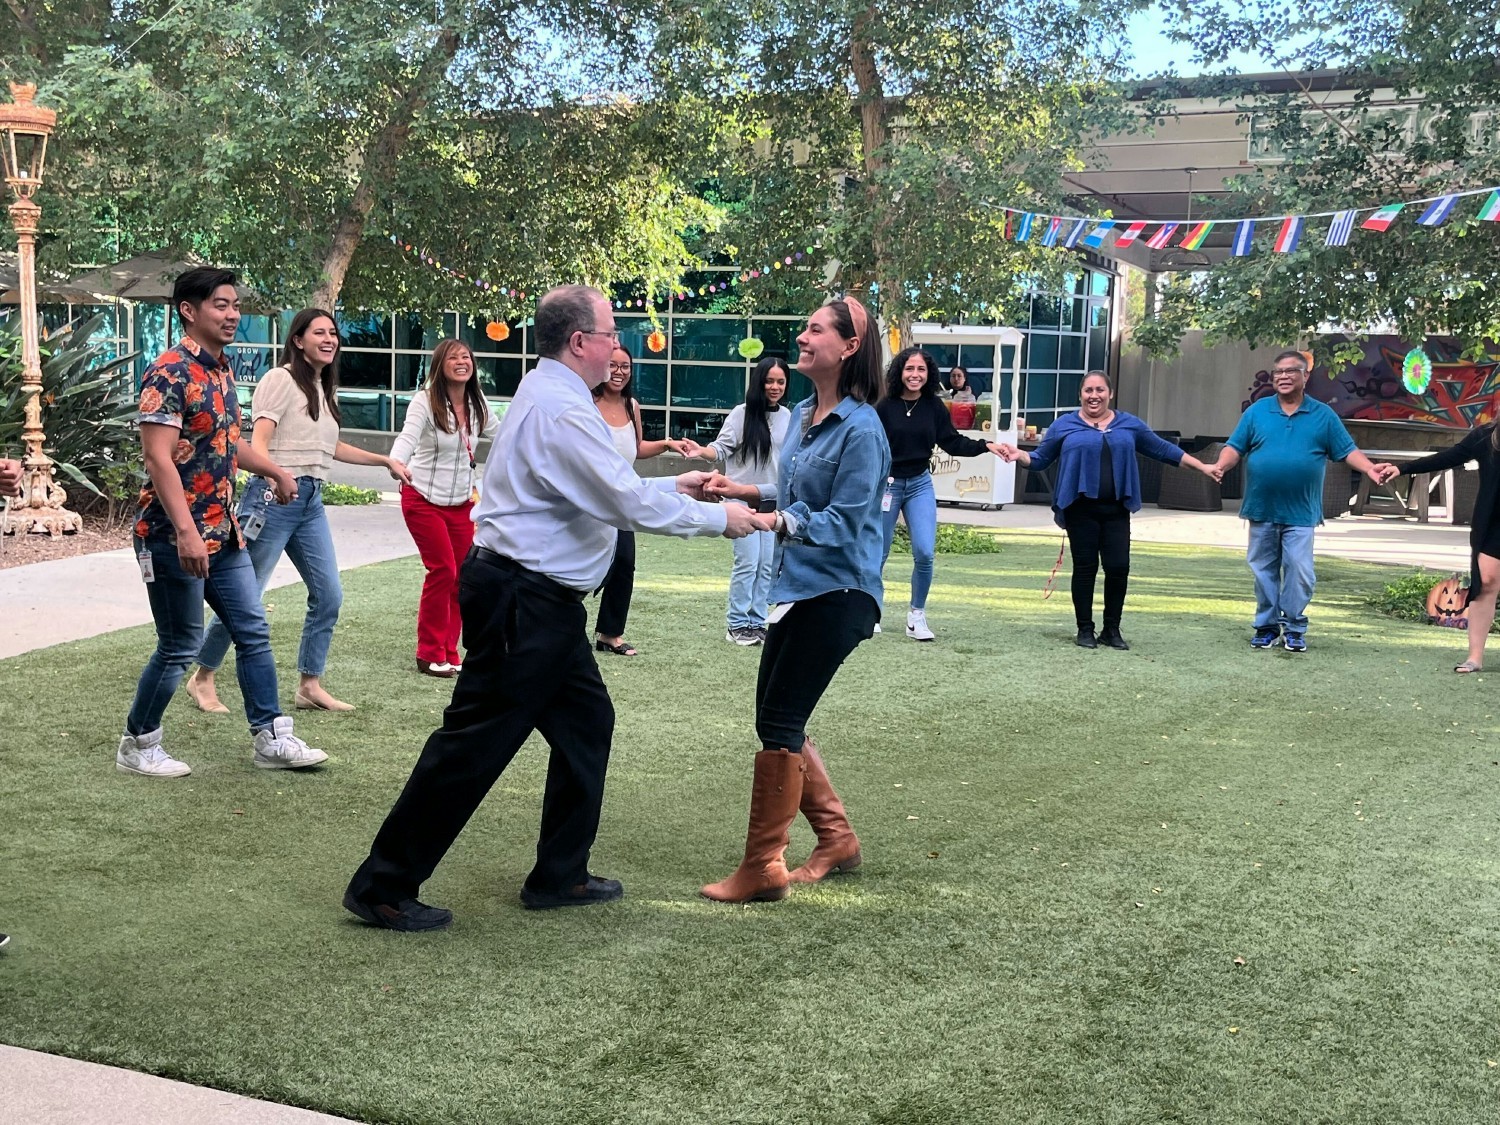 Celebrating Hispanic Heritage Month with a special salsa dancing lesson!